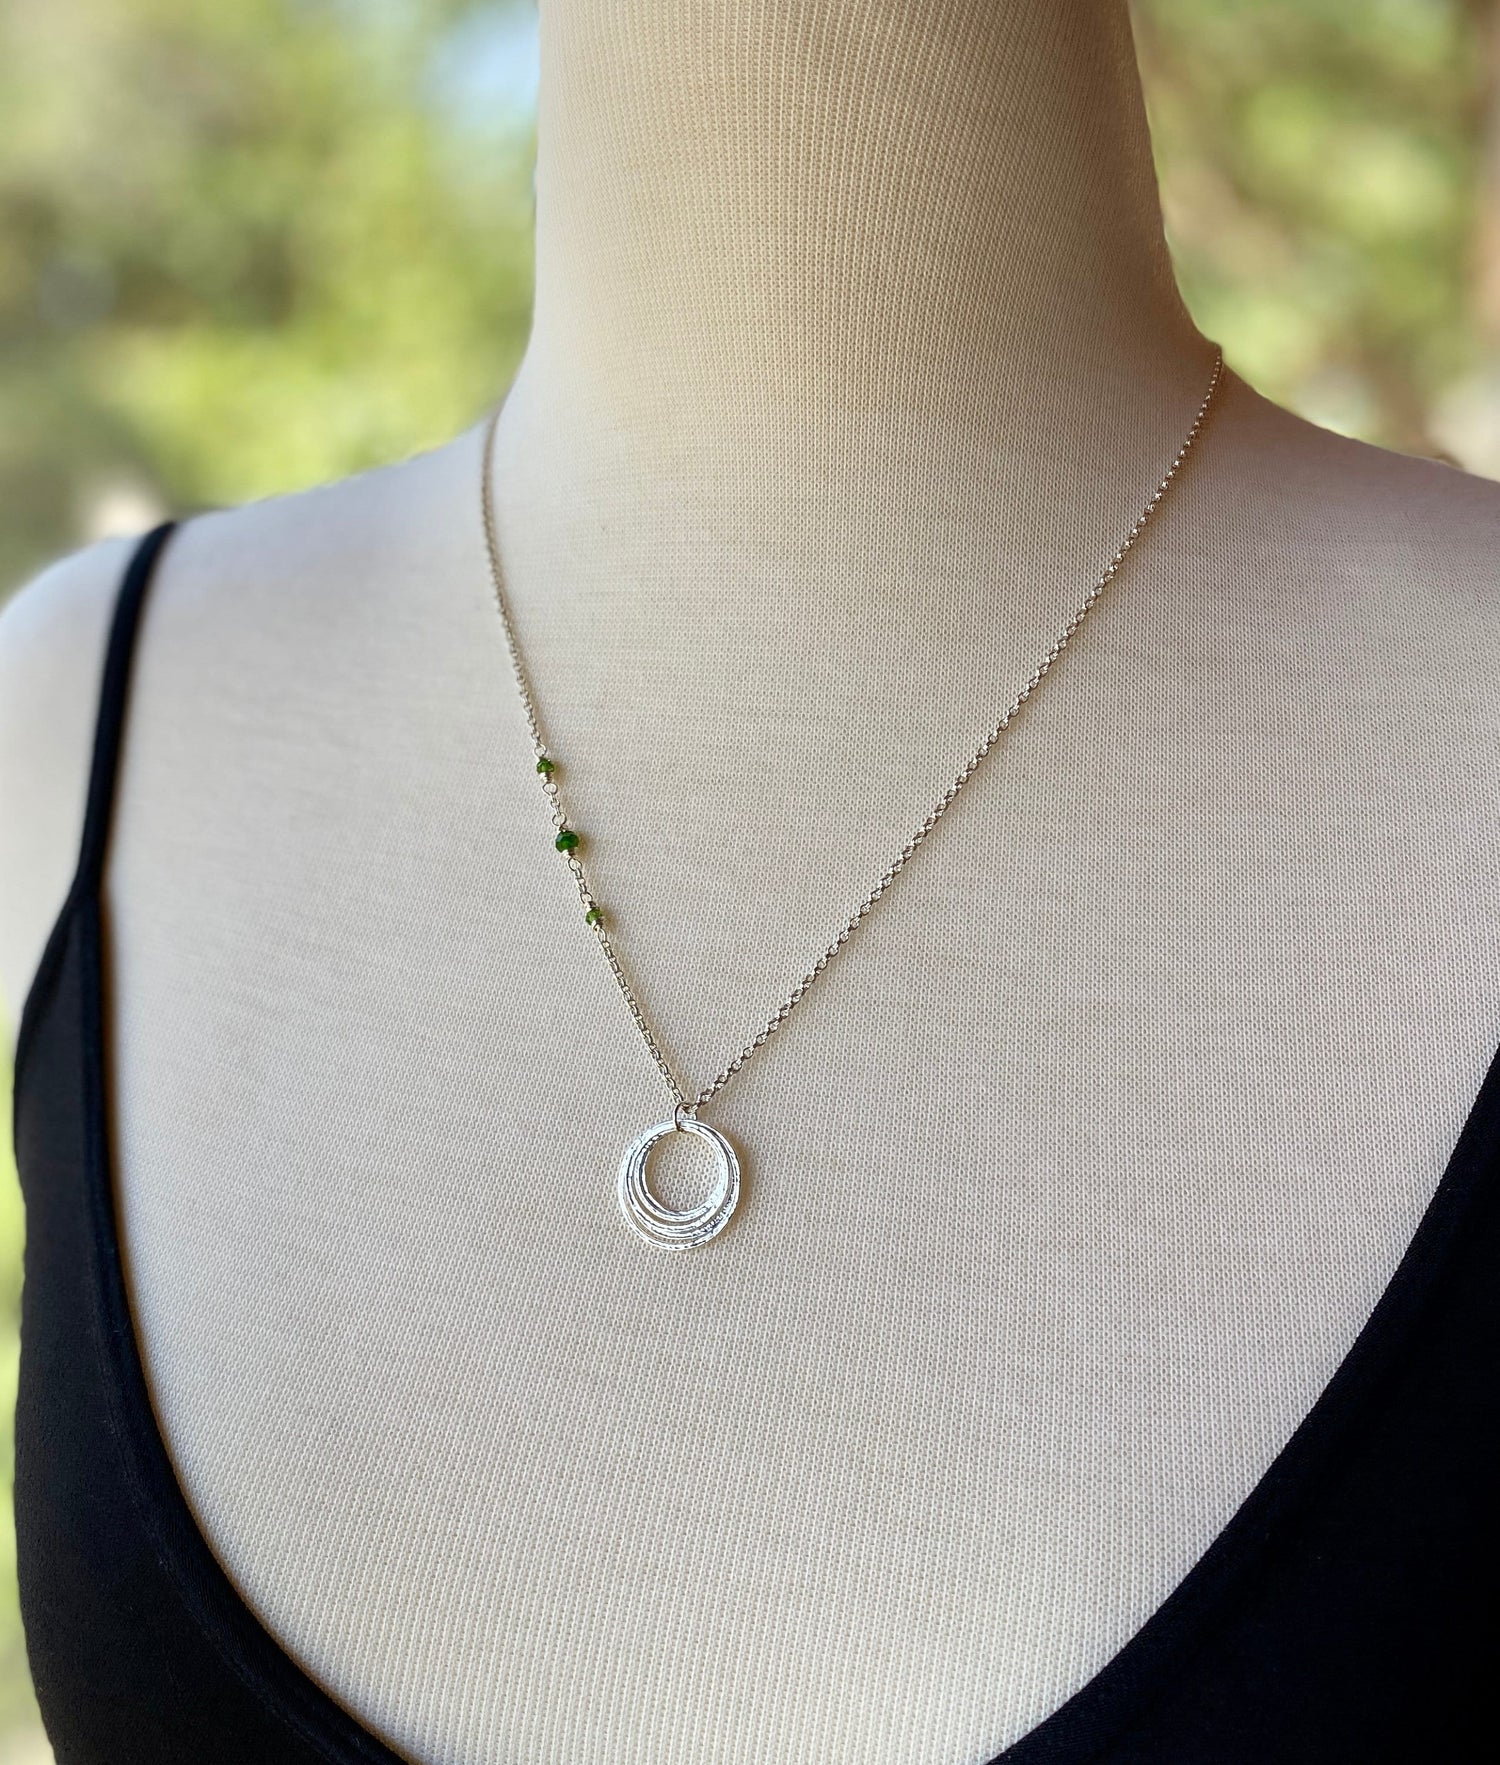 50th Birthday Birthstone Minimalist Necklace, Handcrafted Sterling Silver Five Circle Pendant, 5 Rings for 5 Decades, 50th Birthday